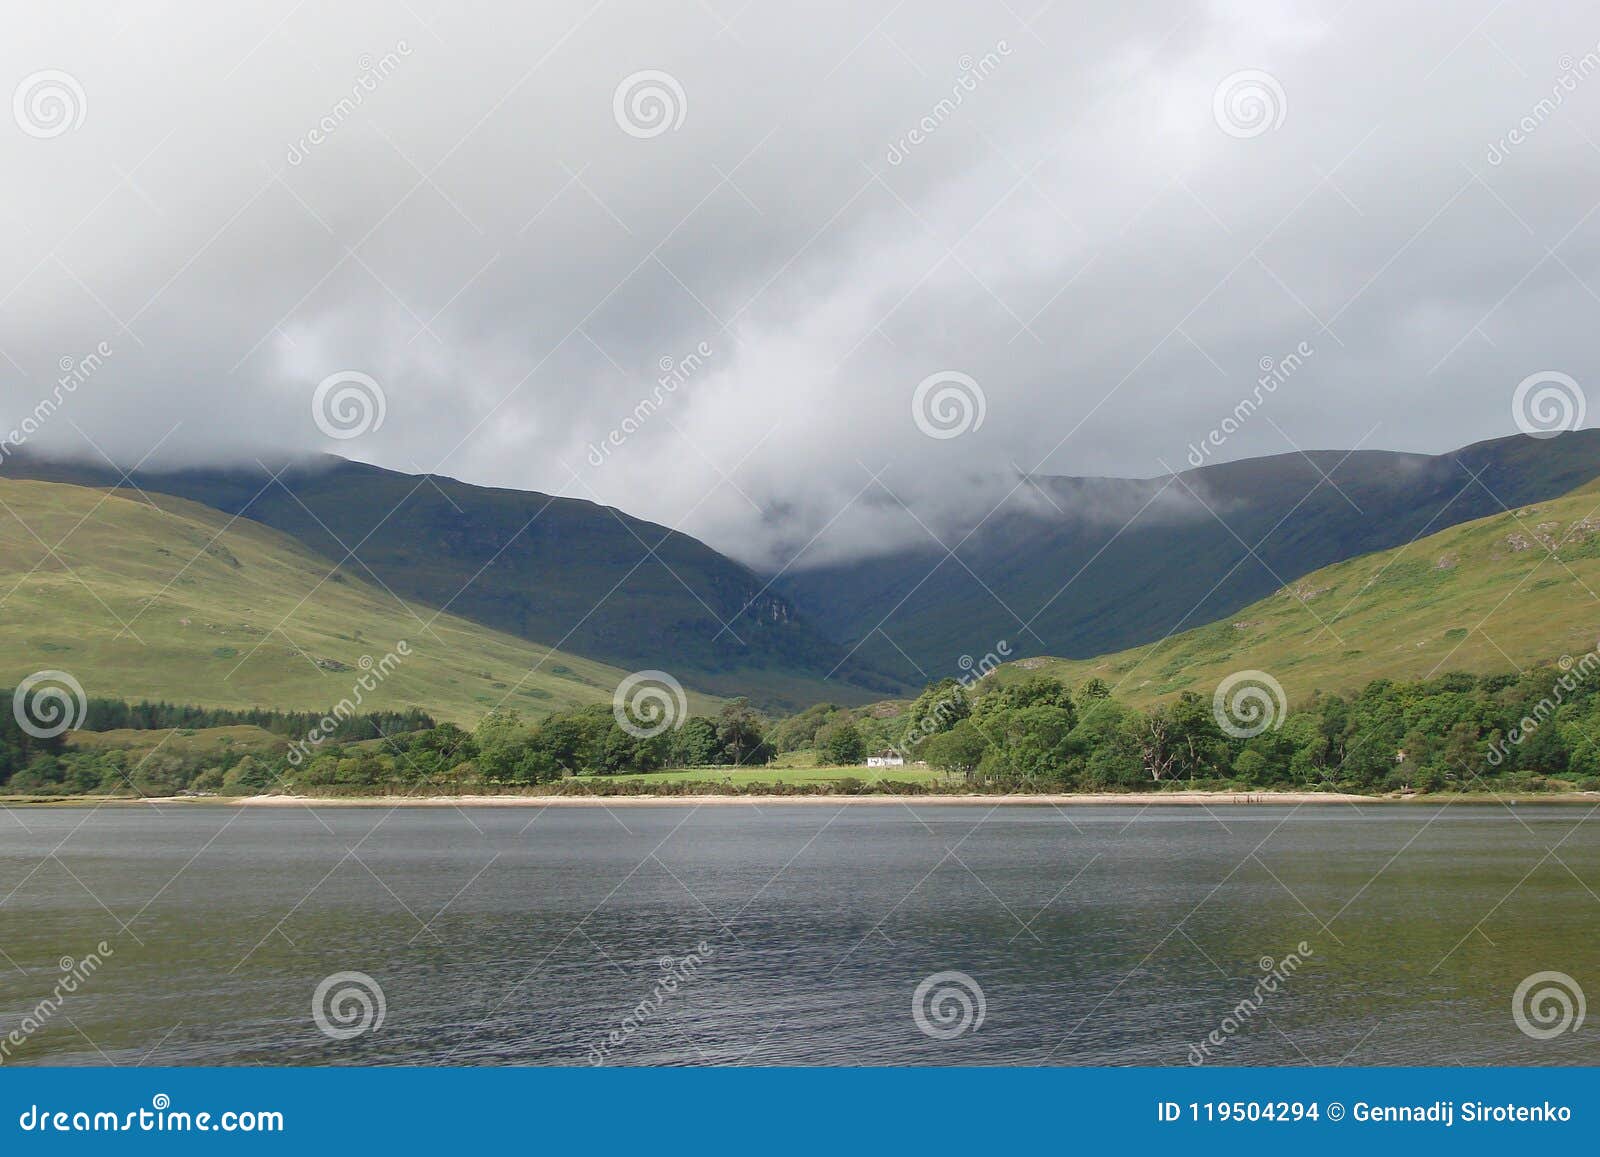 Natural Scenery of the Fjord of Western Scotland Near Fort William ...